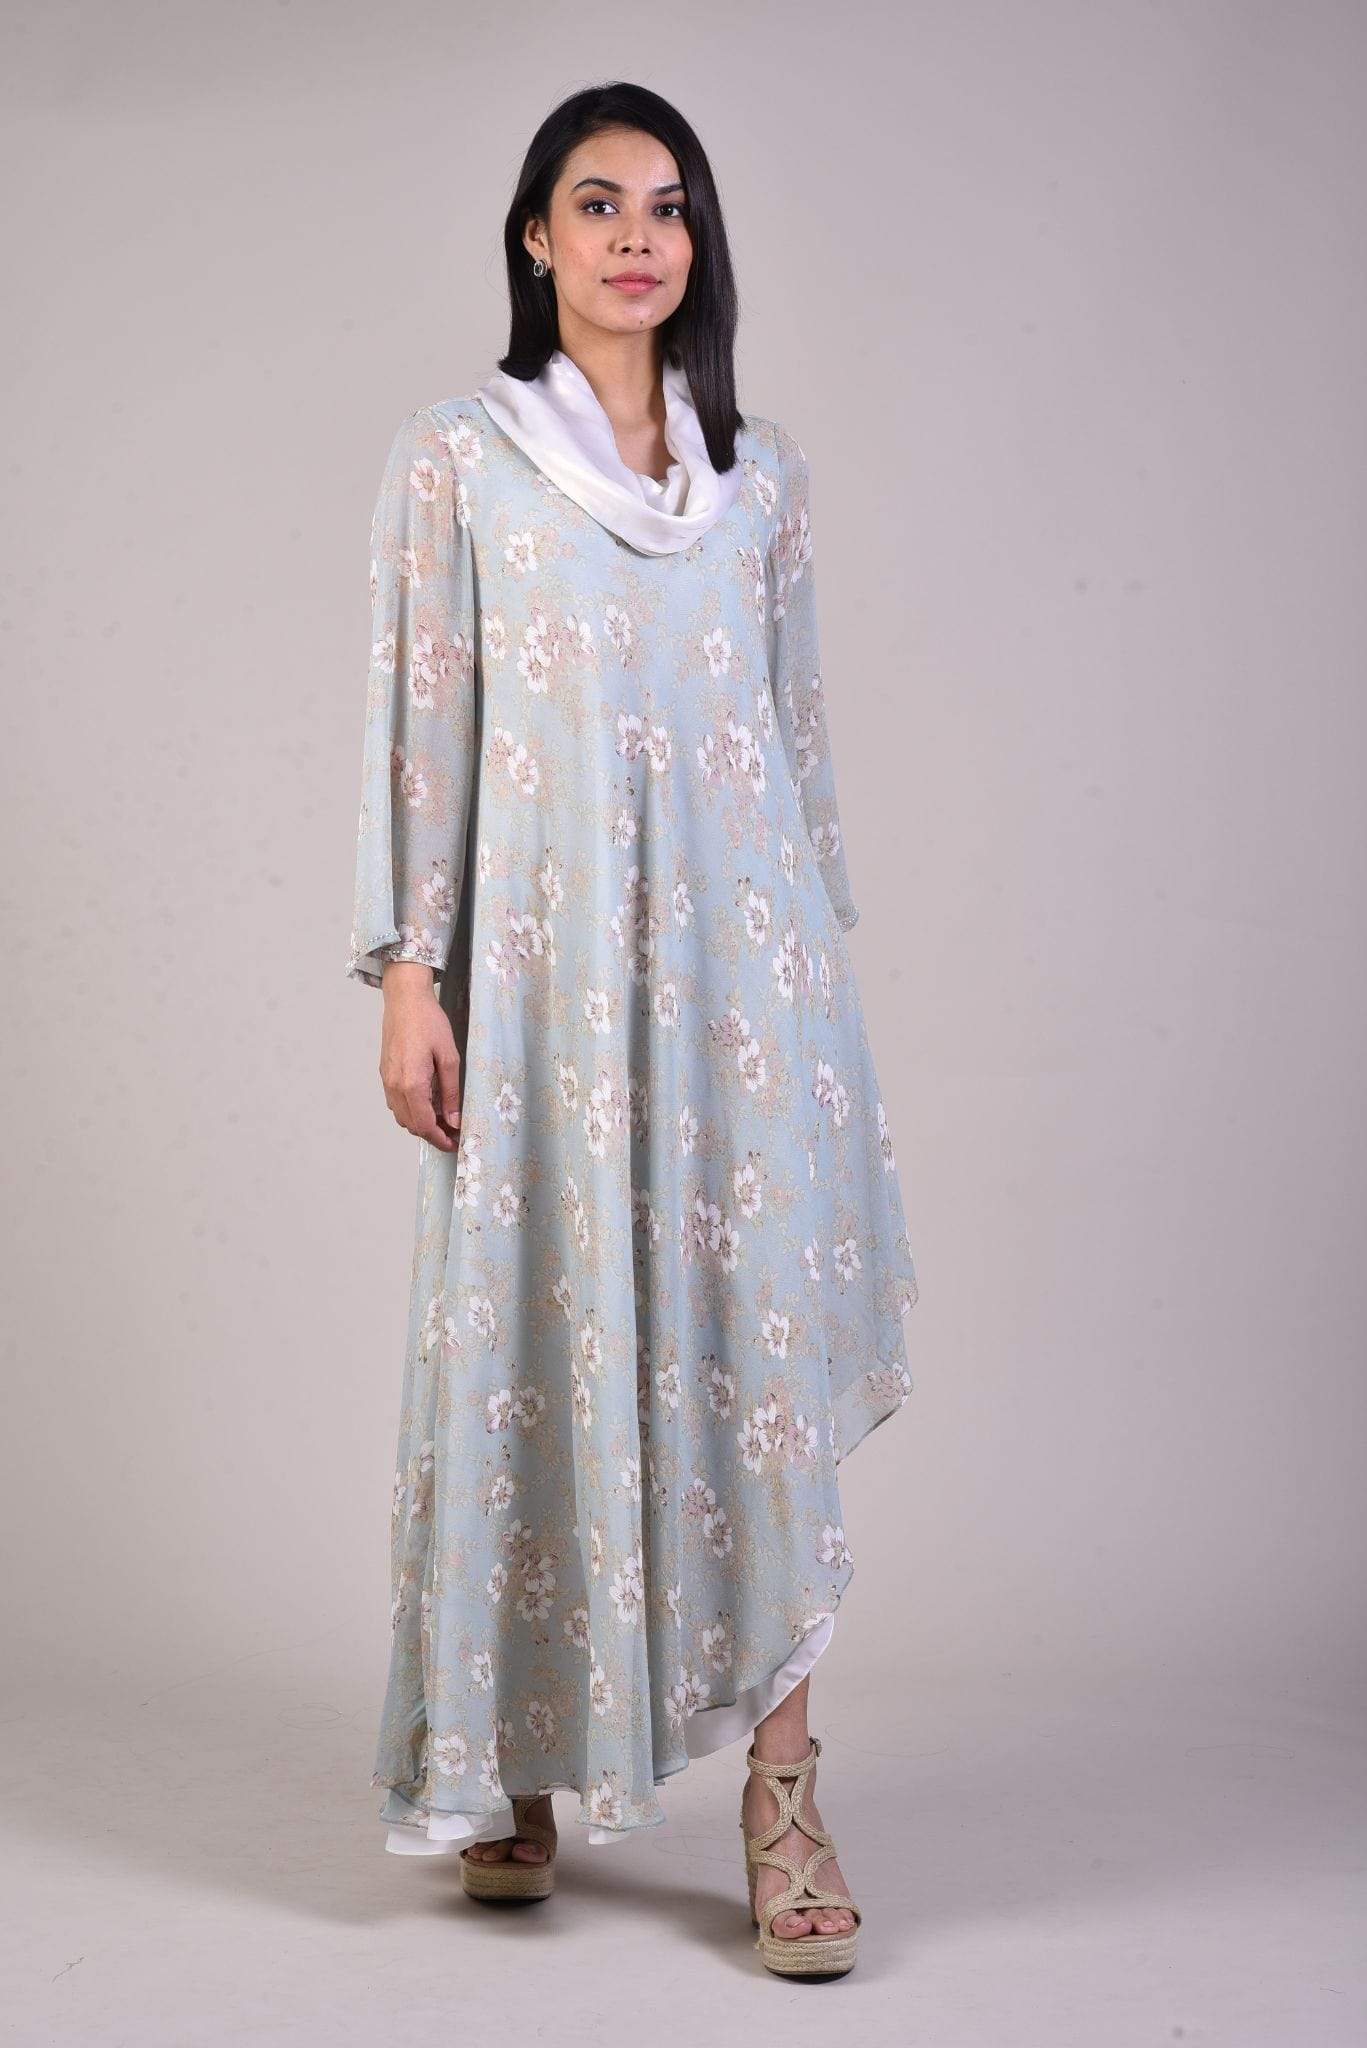 Discover more than 178 cowl neck kurti best